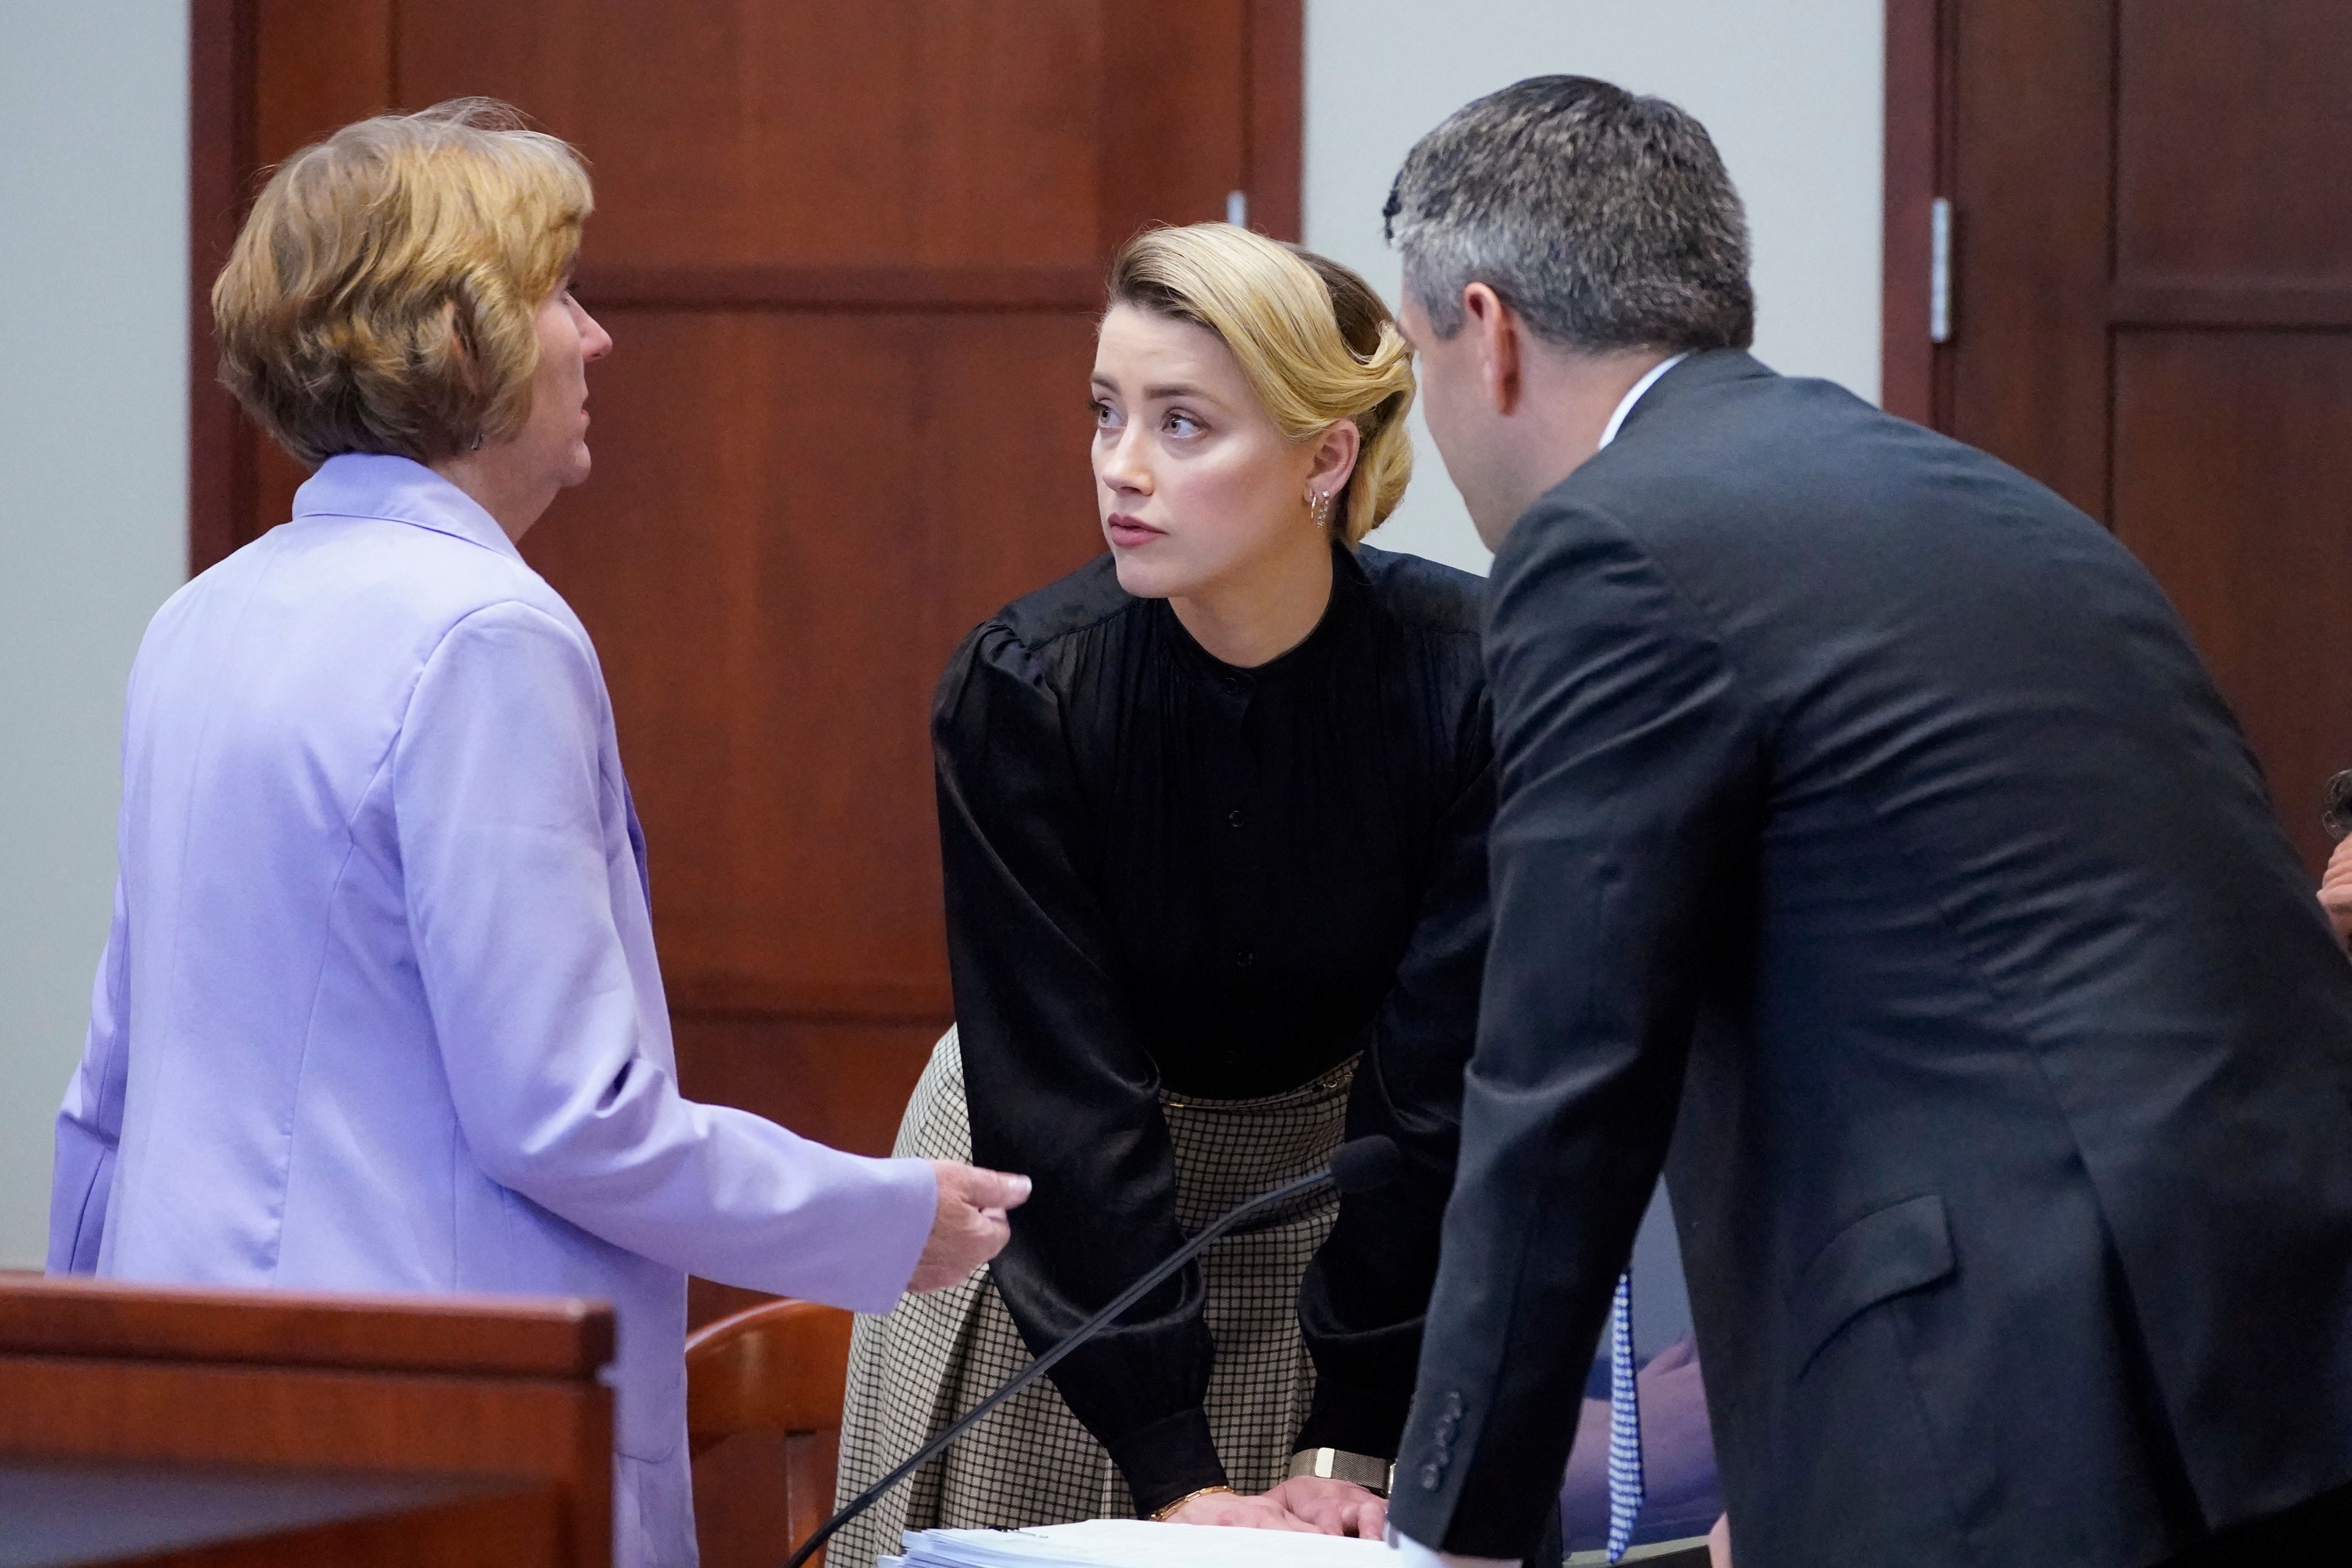 Amber Heard talks to her attorneys in a courtroom at the Fairfax County Courthouse in Fairfax, Virginia on 25 April 2022